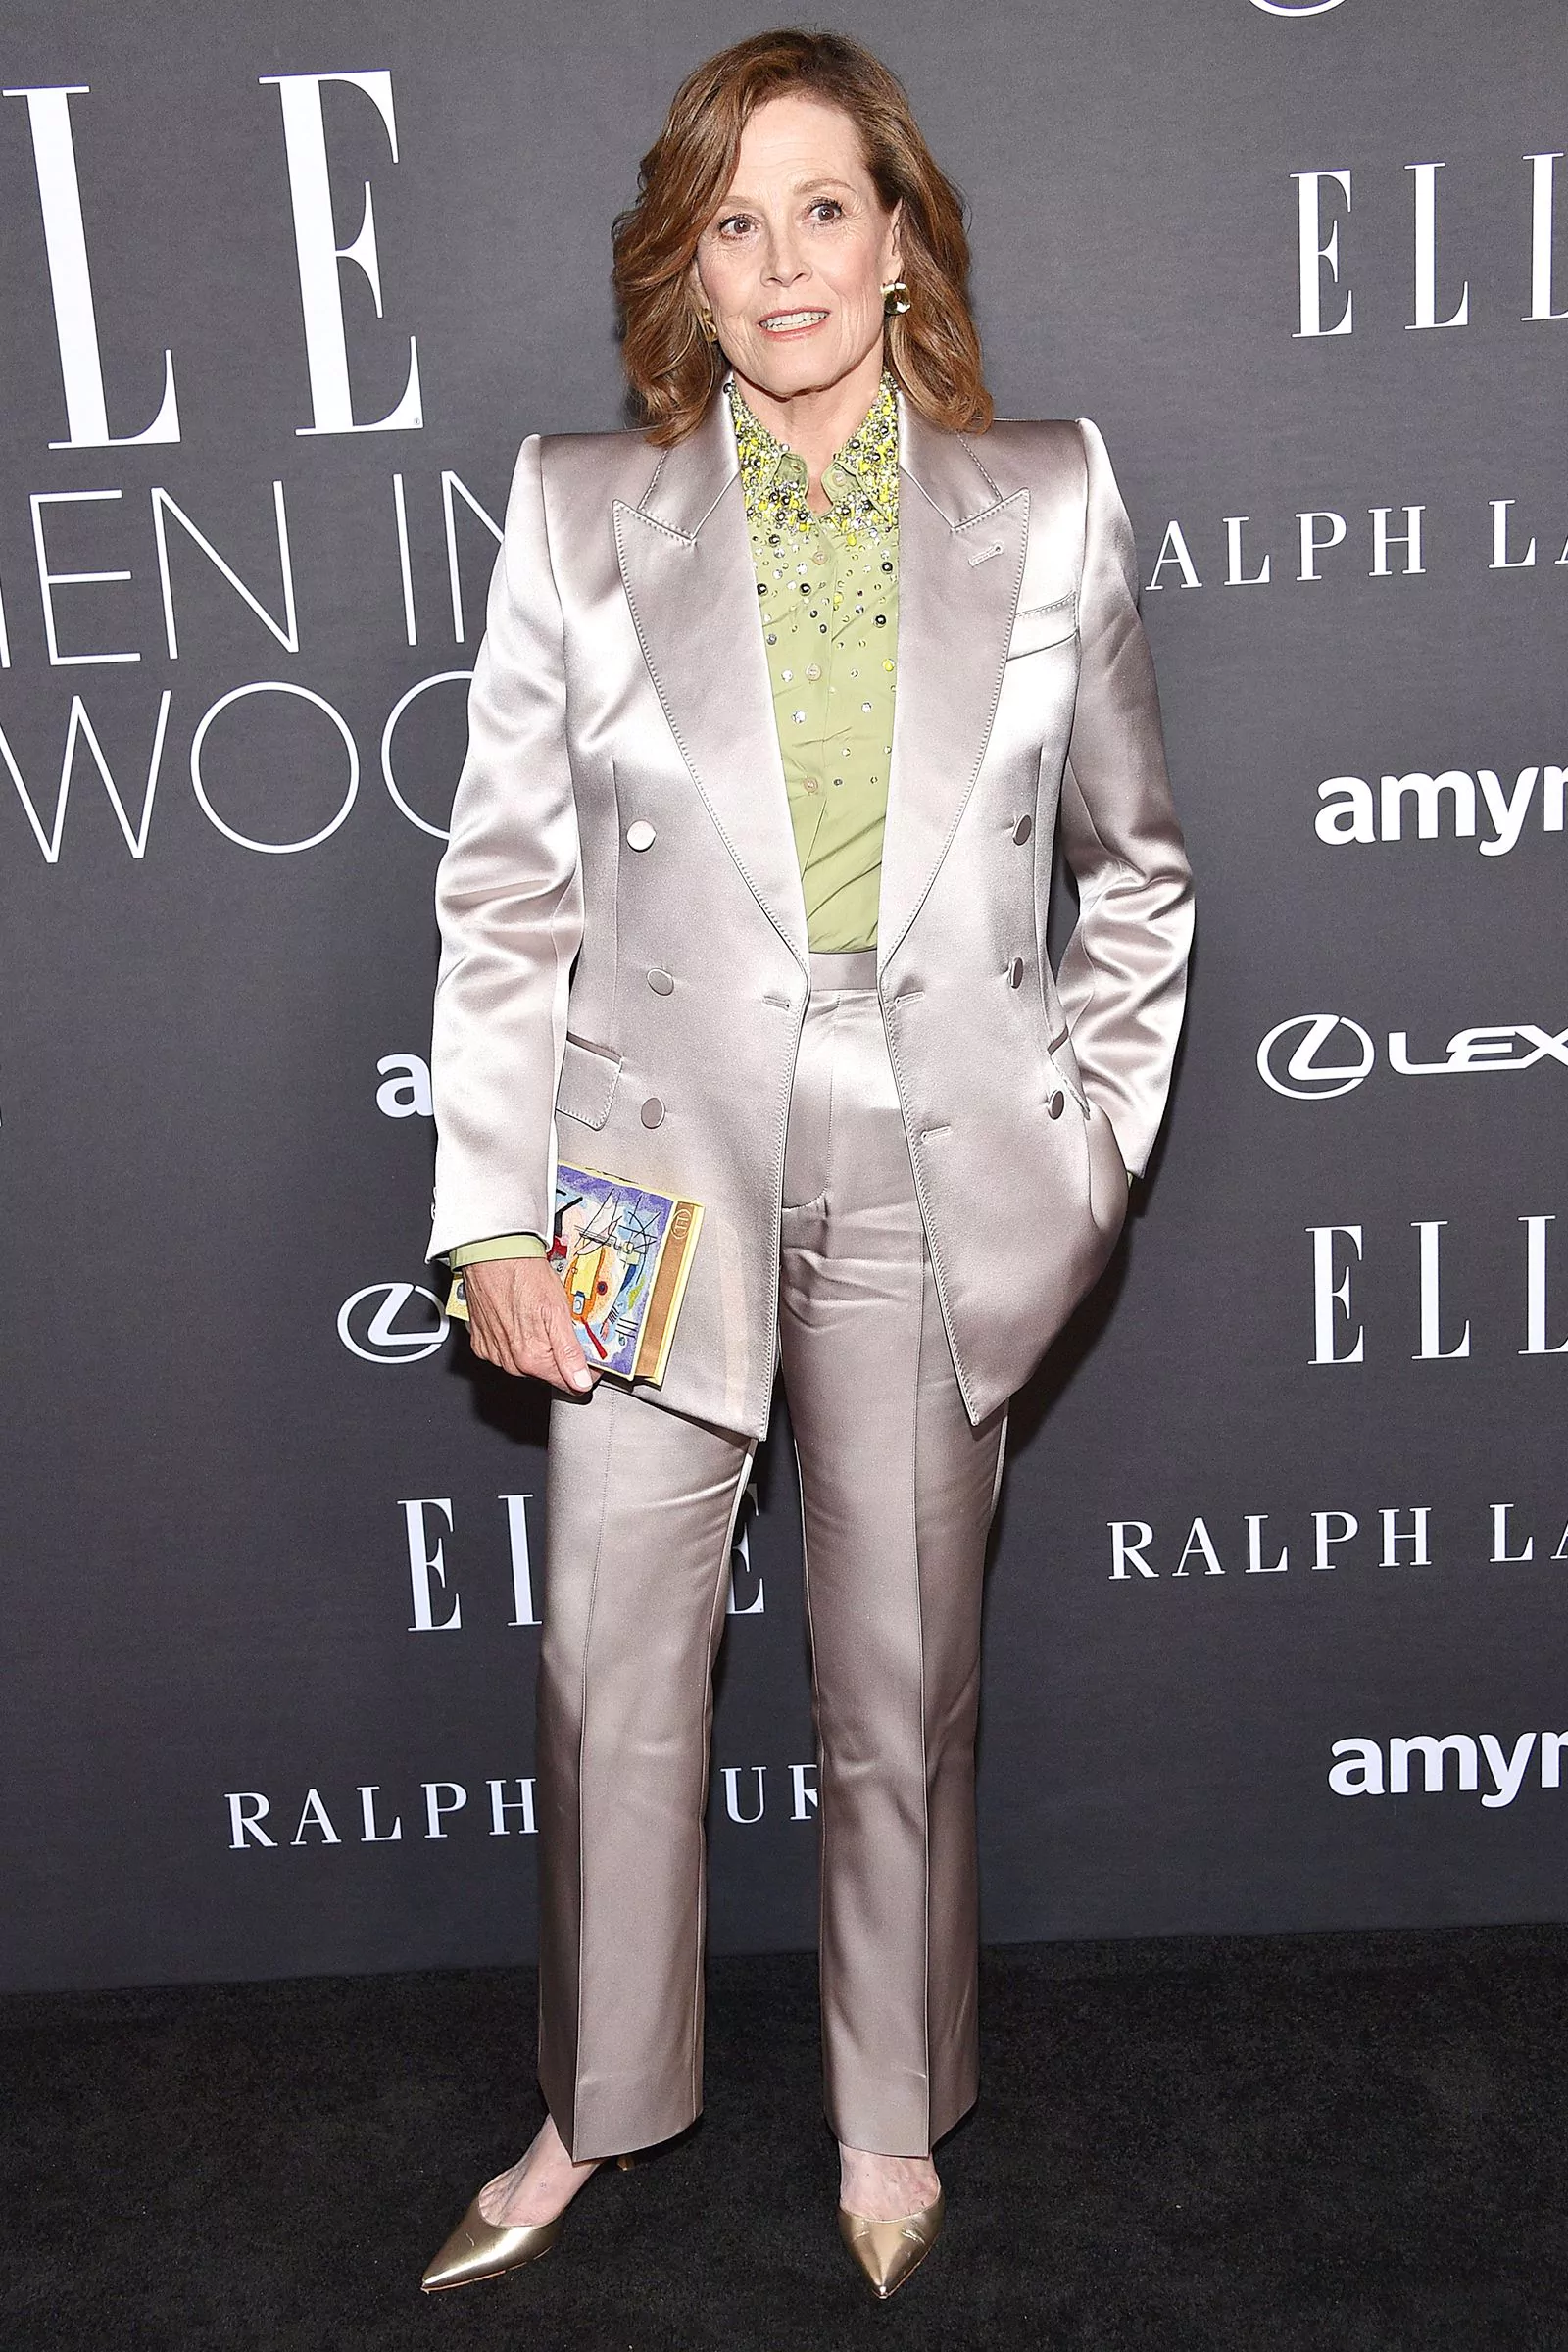 Sigourney Weaver attends the 29th ELLE Women in Hollywood Awards in Los Angeles on October 17, 2022.